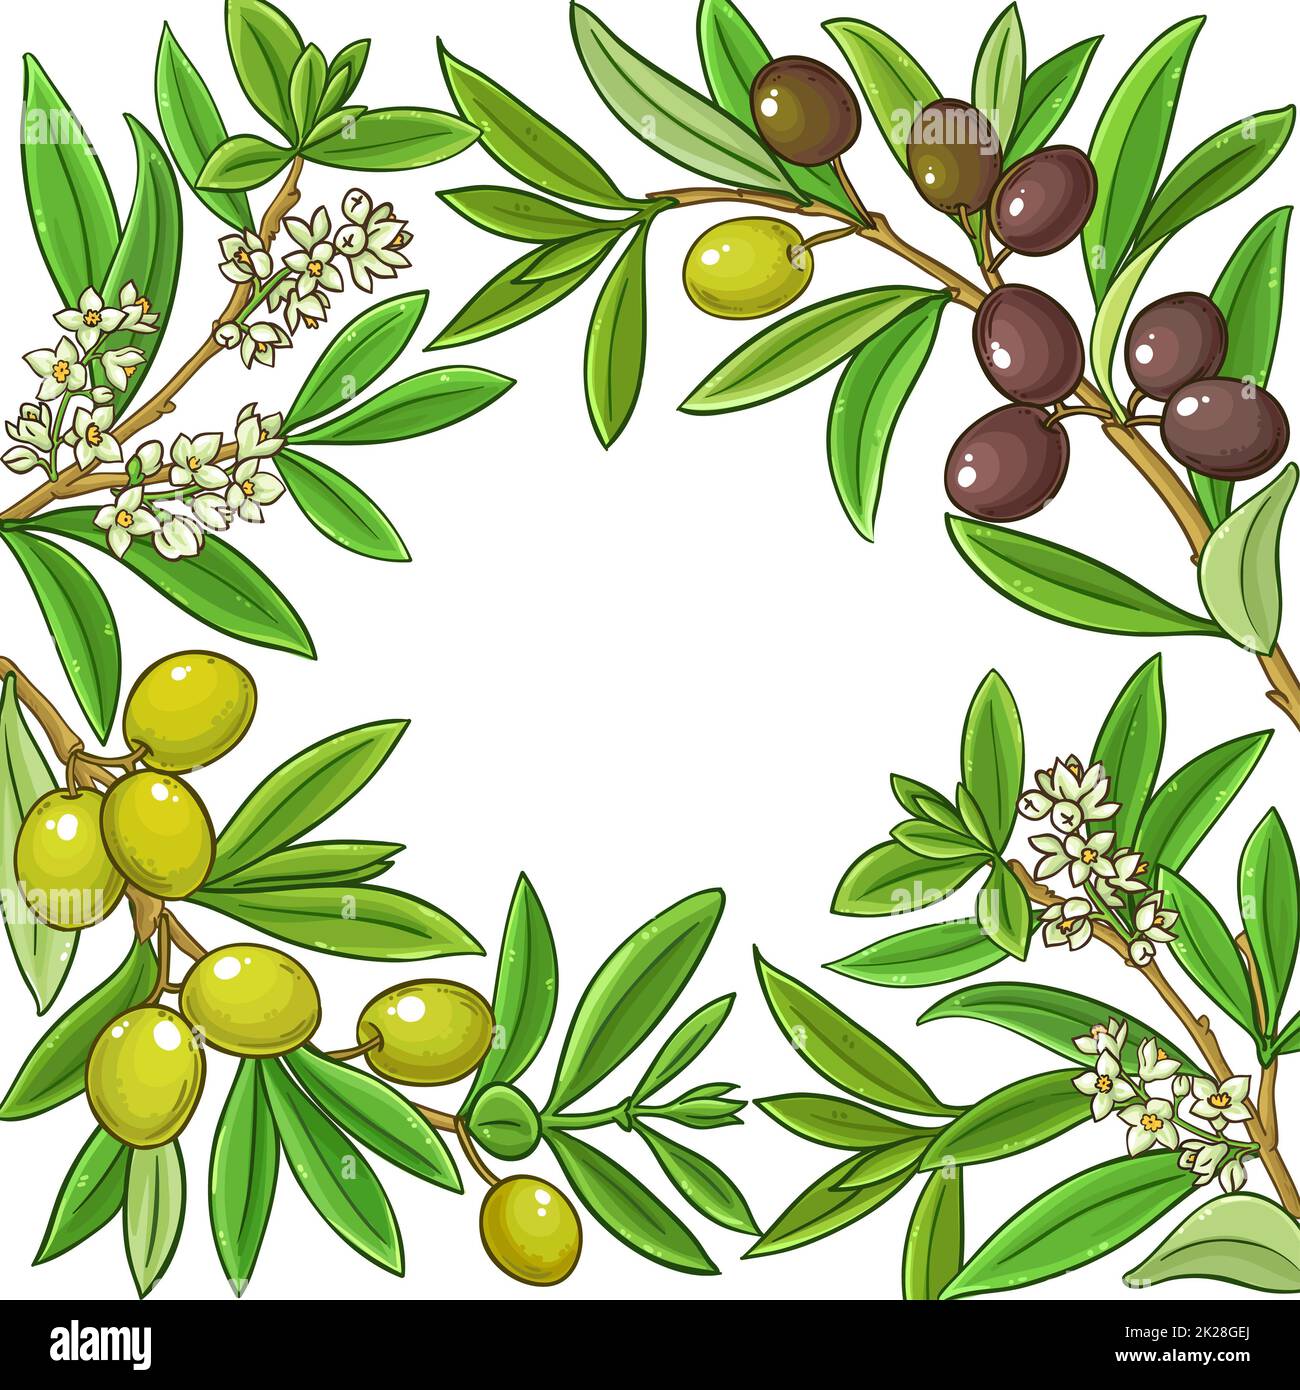 olive branches vector frame on white background Stock Photo